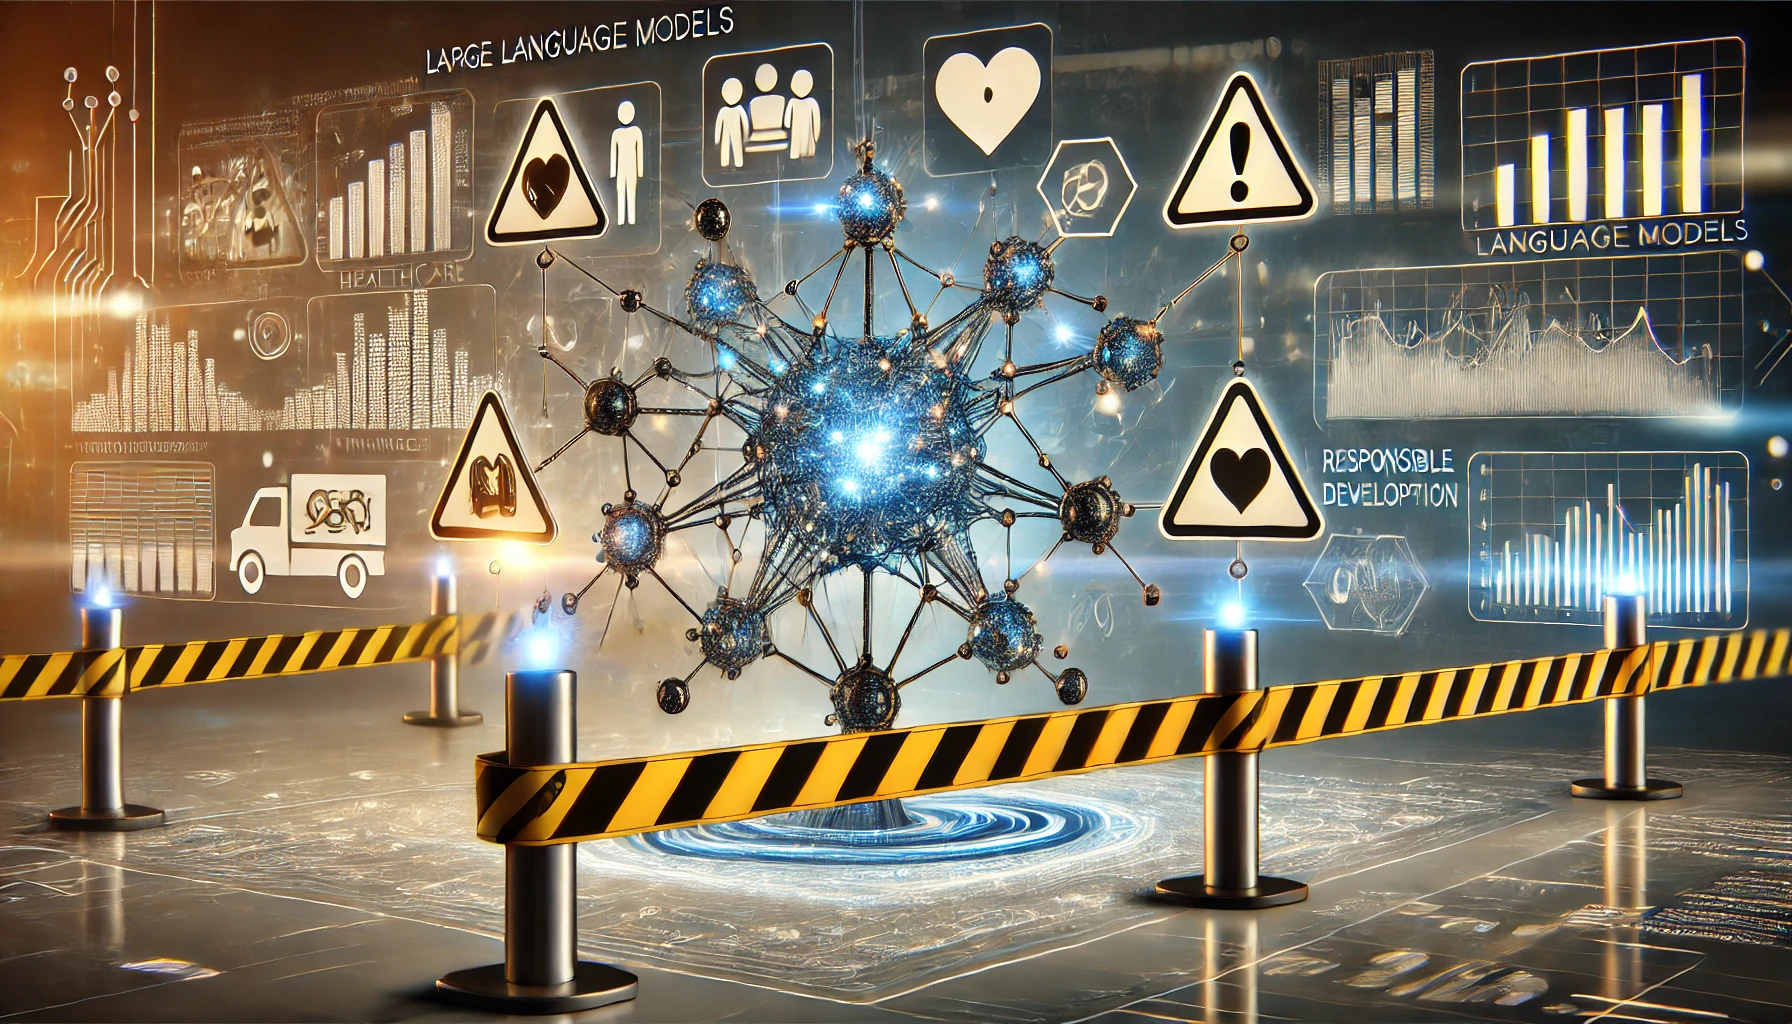 Futuristic illustration depicting the integration of Large Language Models (LLMs) in healthcare, finance, and marketing. The image shows LLMs as interconnected nodes with guardrails symbolizing safety and security, set against a background of tech elements and digital connections, featuring icons like healthcare symbols, financial graphs, and marketing analytics.